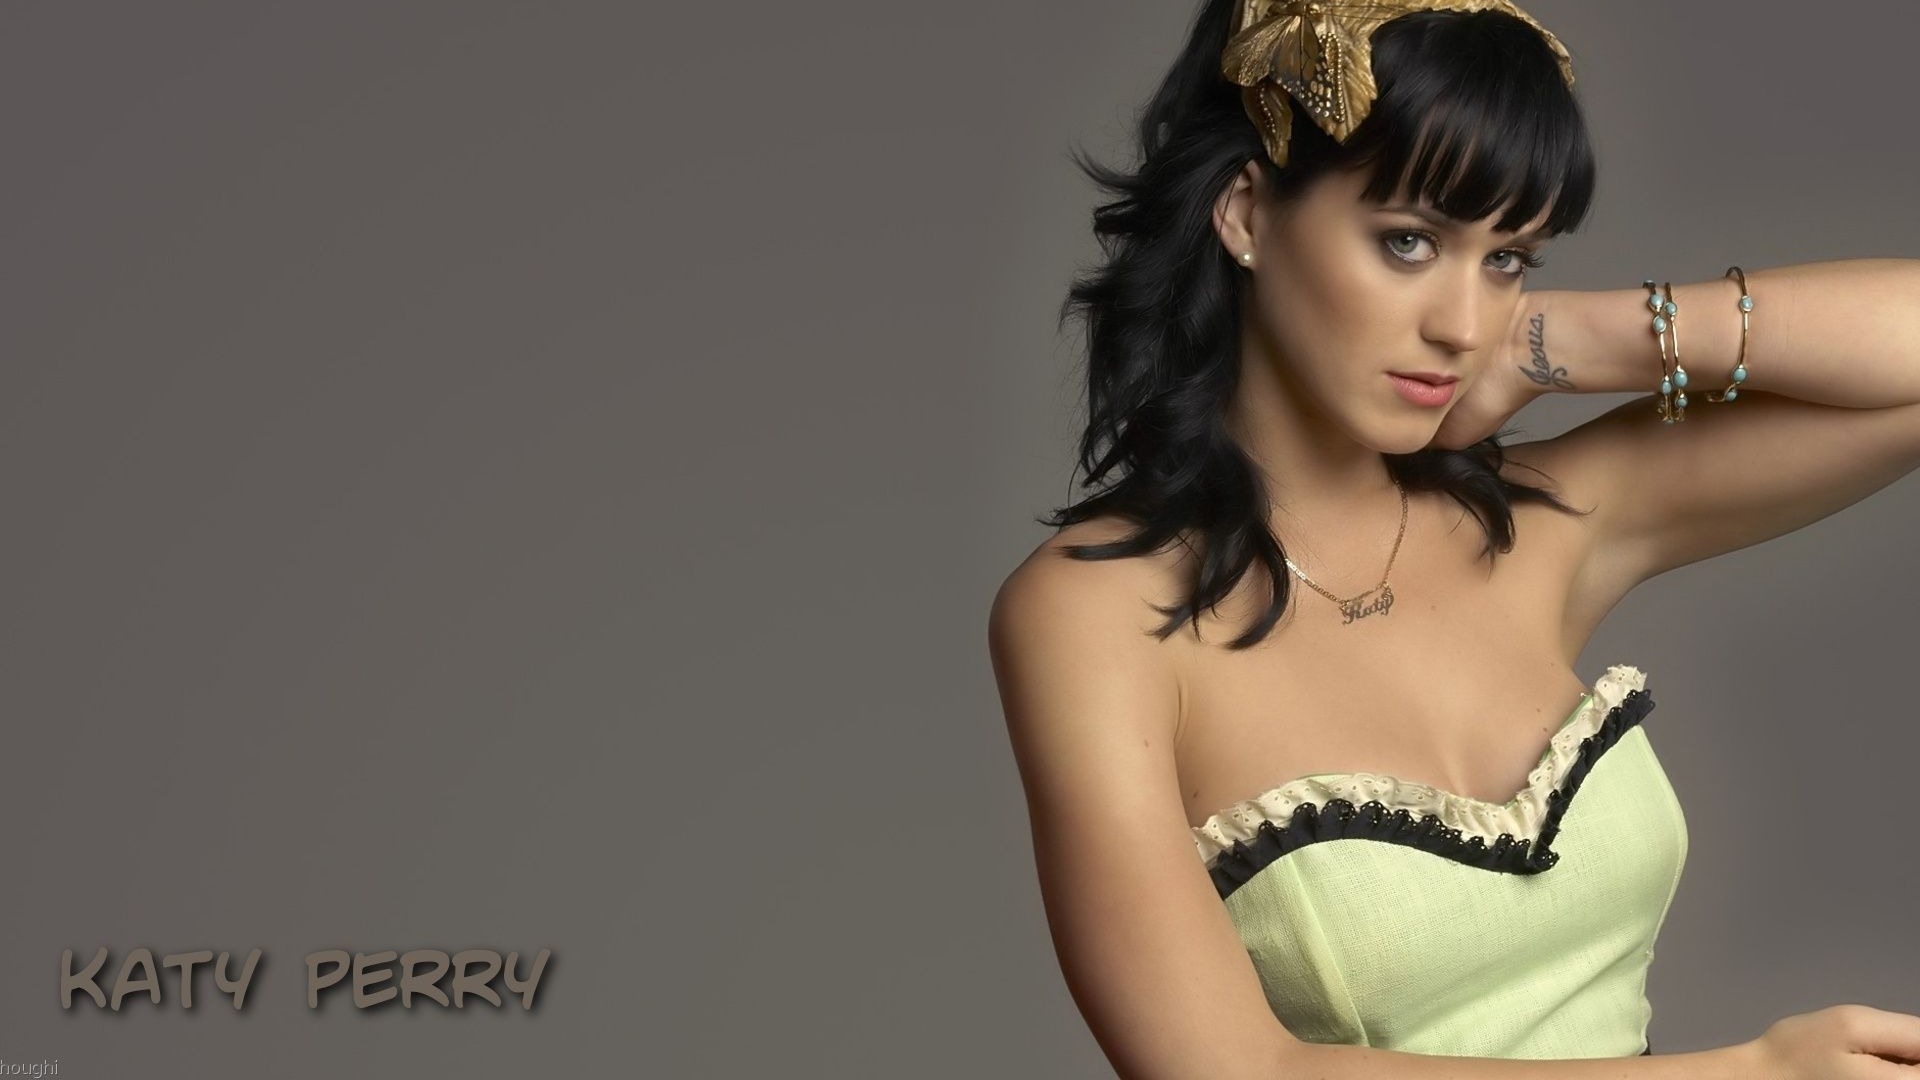 Katy Perry #009 - 1920x1080 Wallpapers Pictures Photos Images